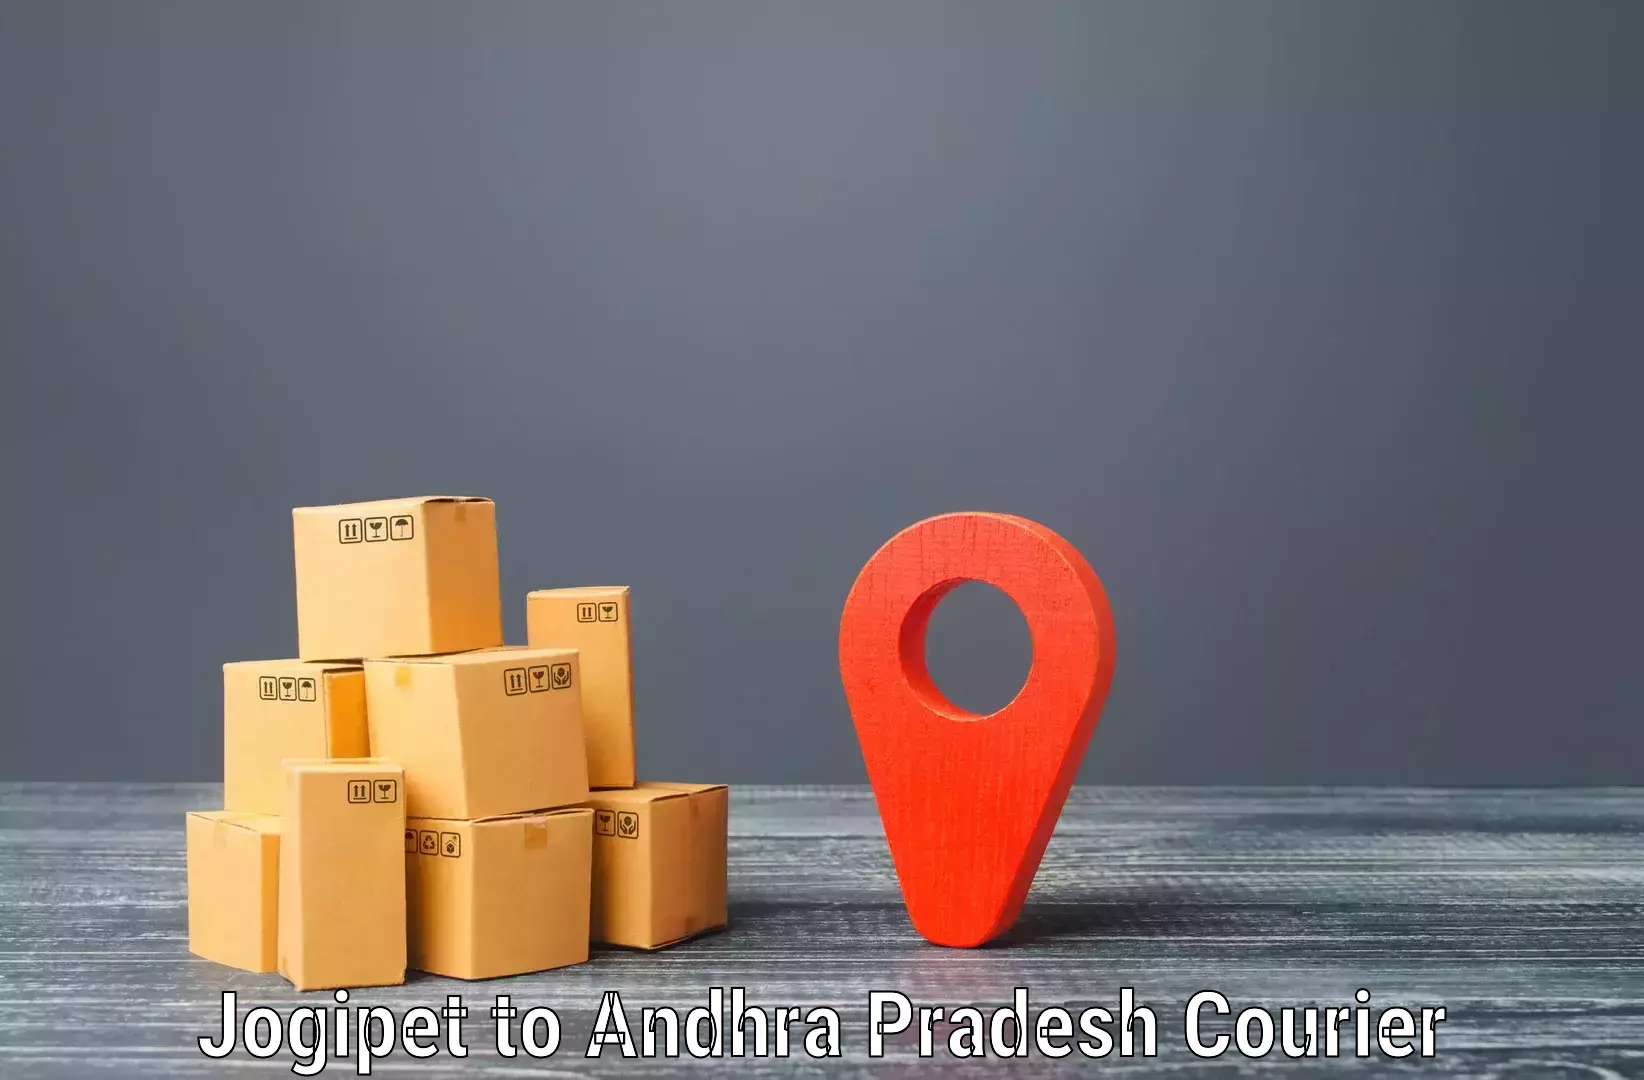 Professional courier services Jogipet to Gullapalli